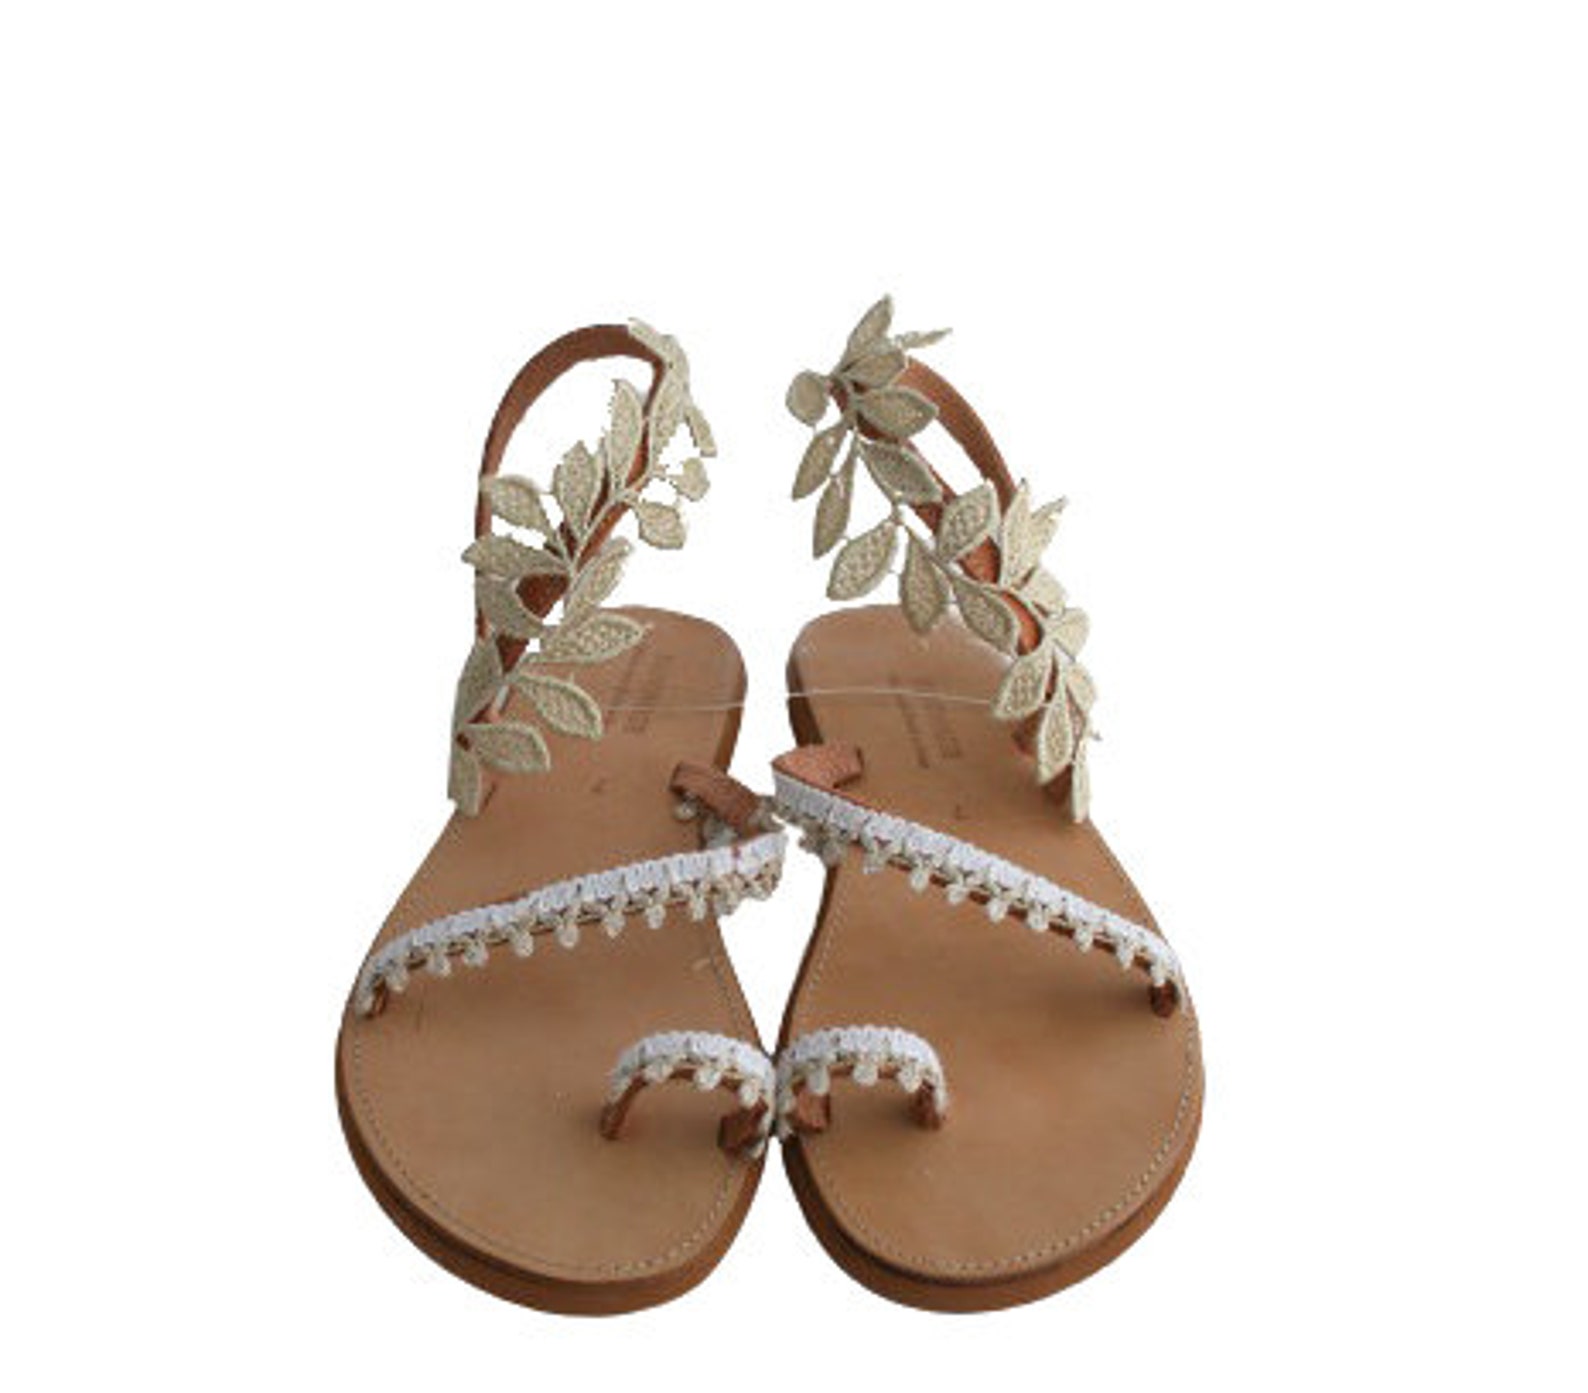 Mommy and Me Sandals Matching Sandals Gold Lace Sandals - Etsy